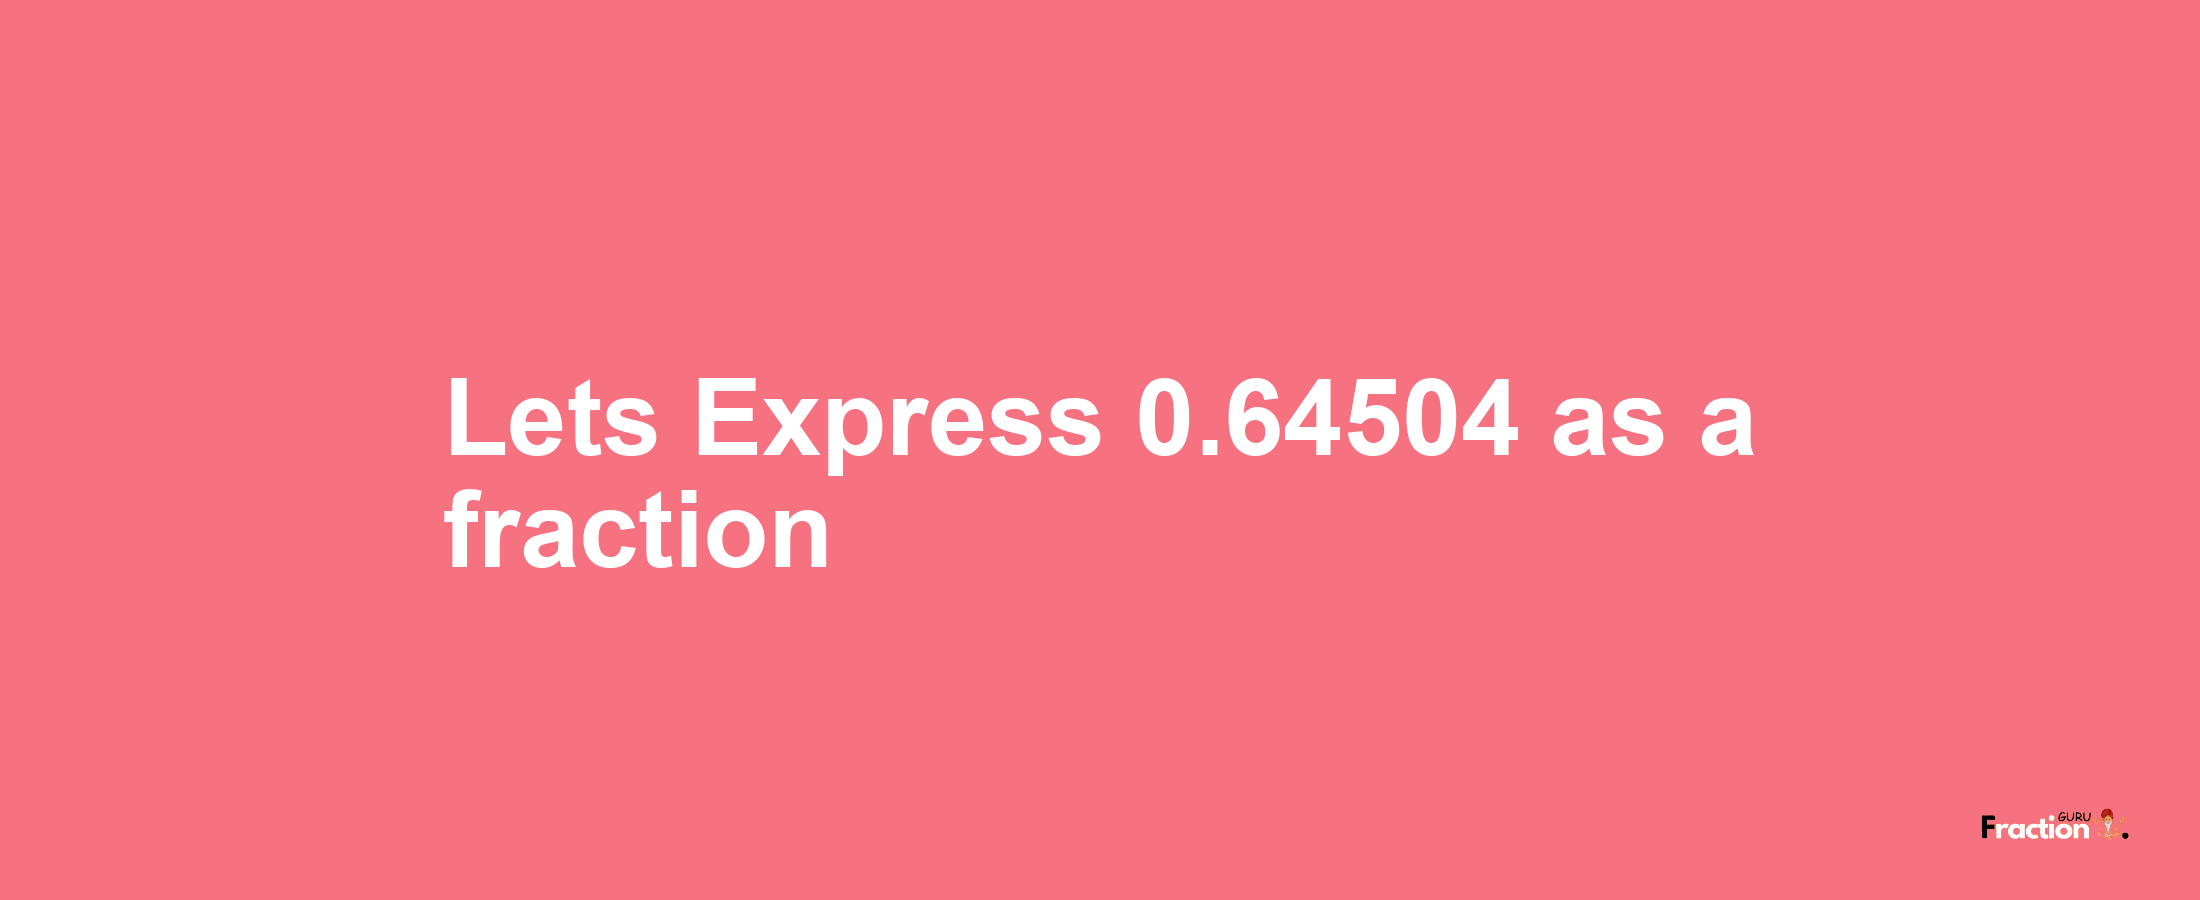 Lets Express 0.64504 as afraction